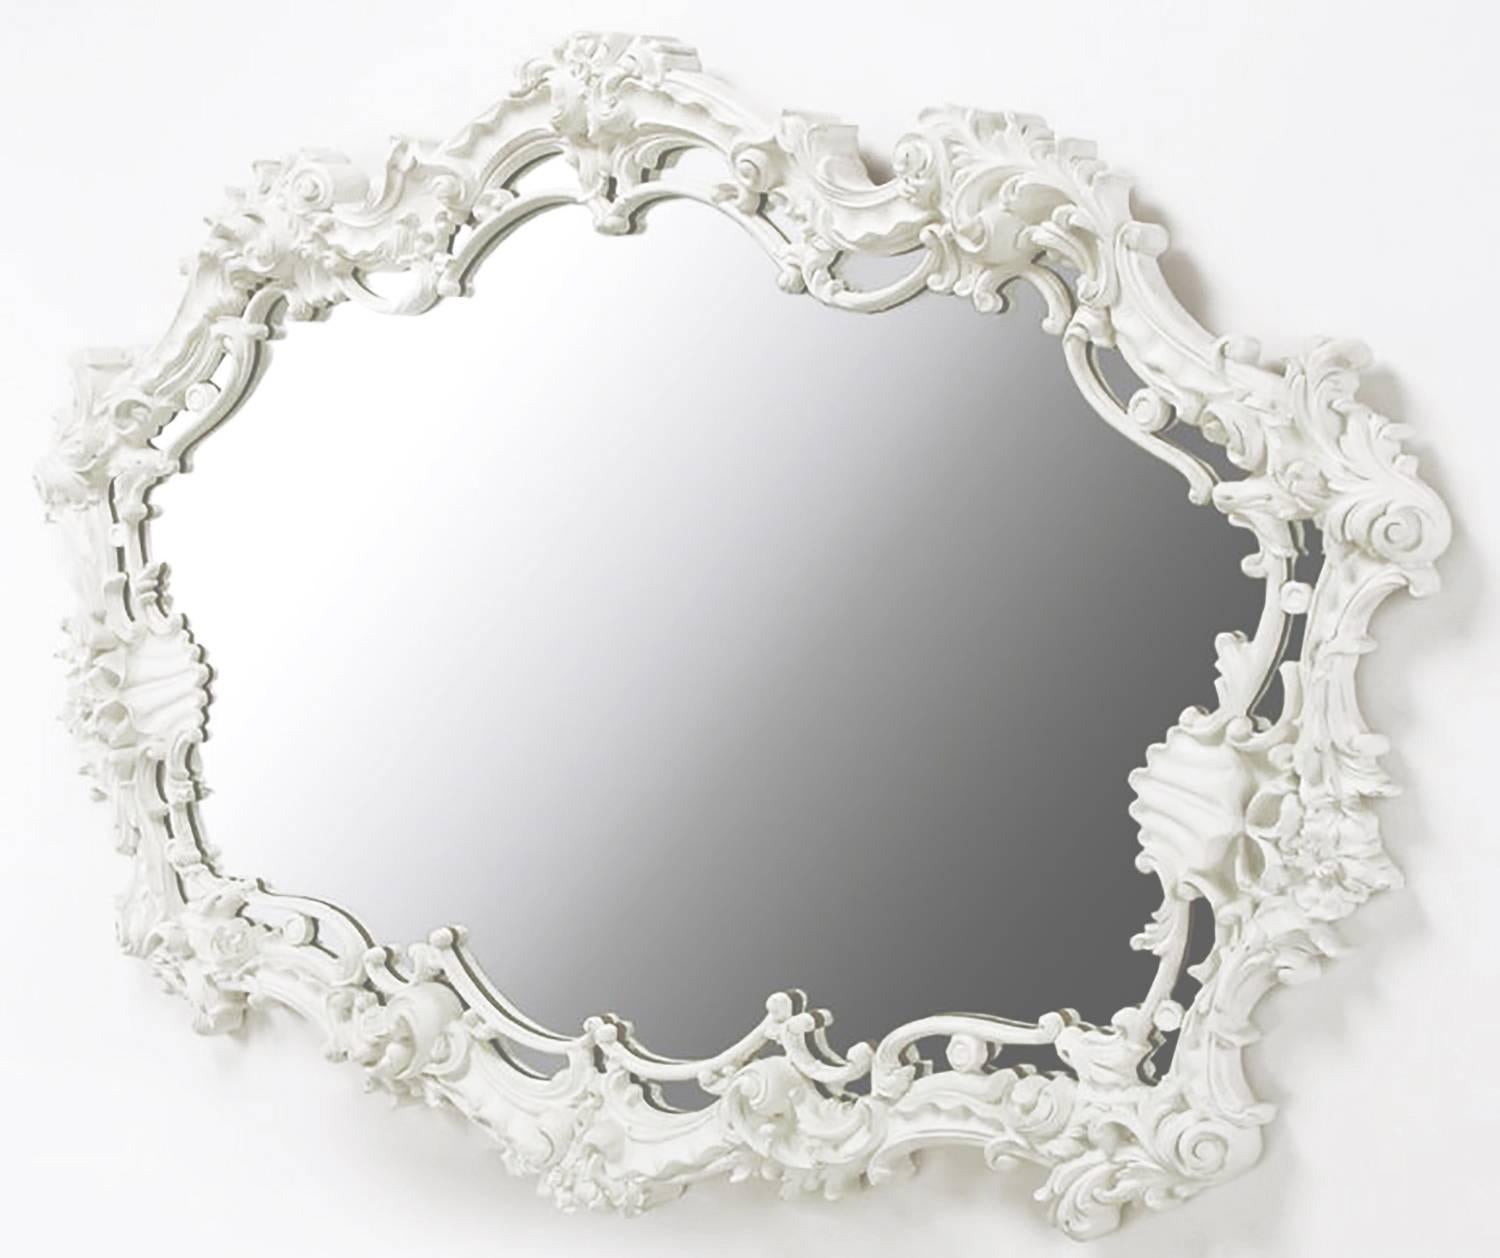 Extraordinary cast gesso Italian Rococo style mirror in white lacquer with filigree and shell detail. Perfect for a vanity, over mantel or in the bedroom over a long dresser. Serge Roche and Dorothy Draper were both proponents of monochrome white